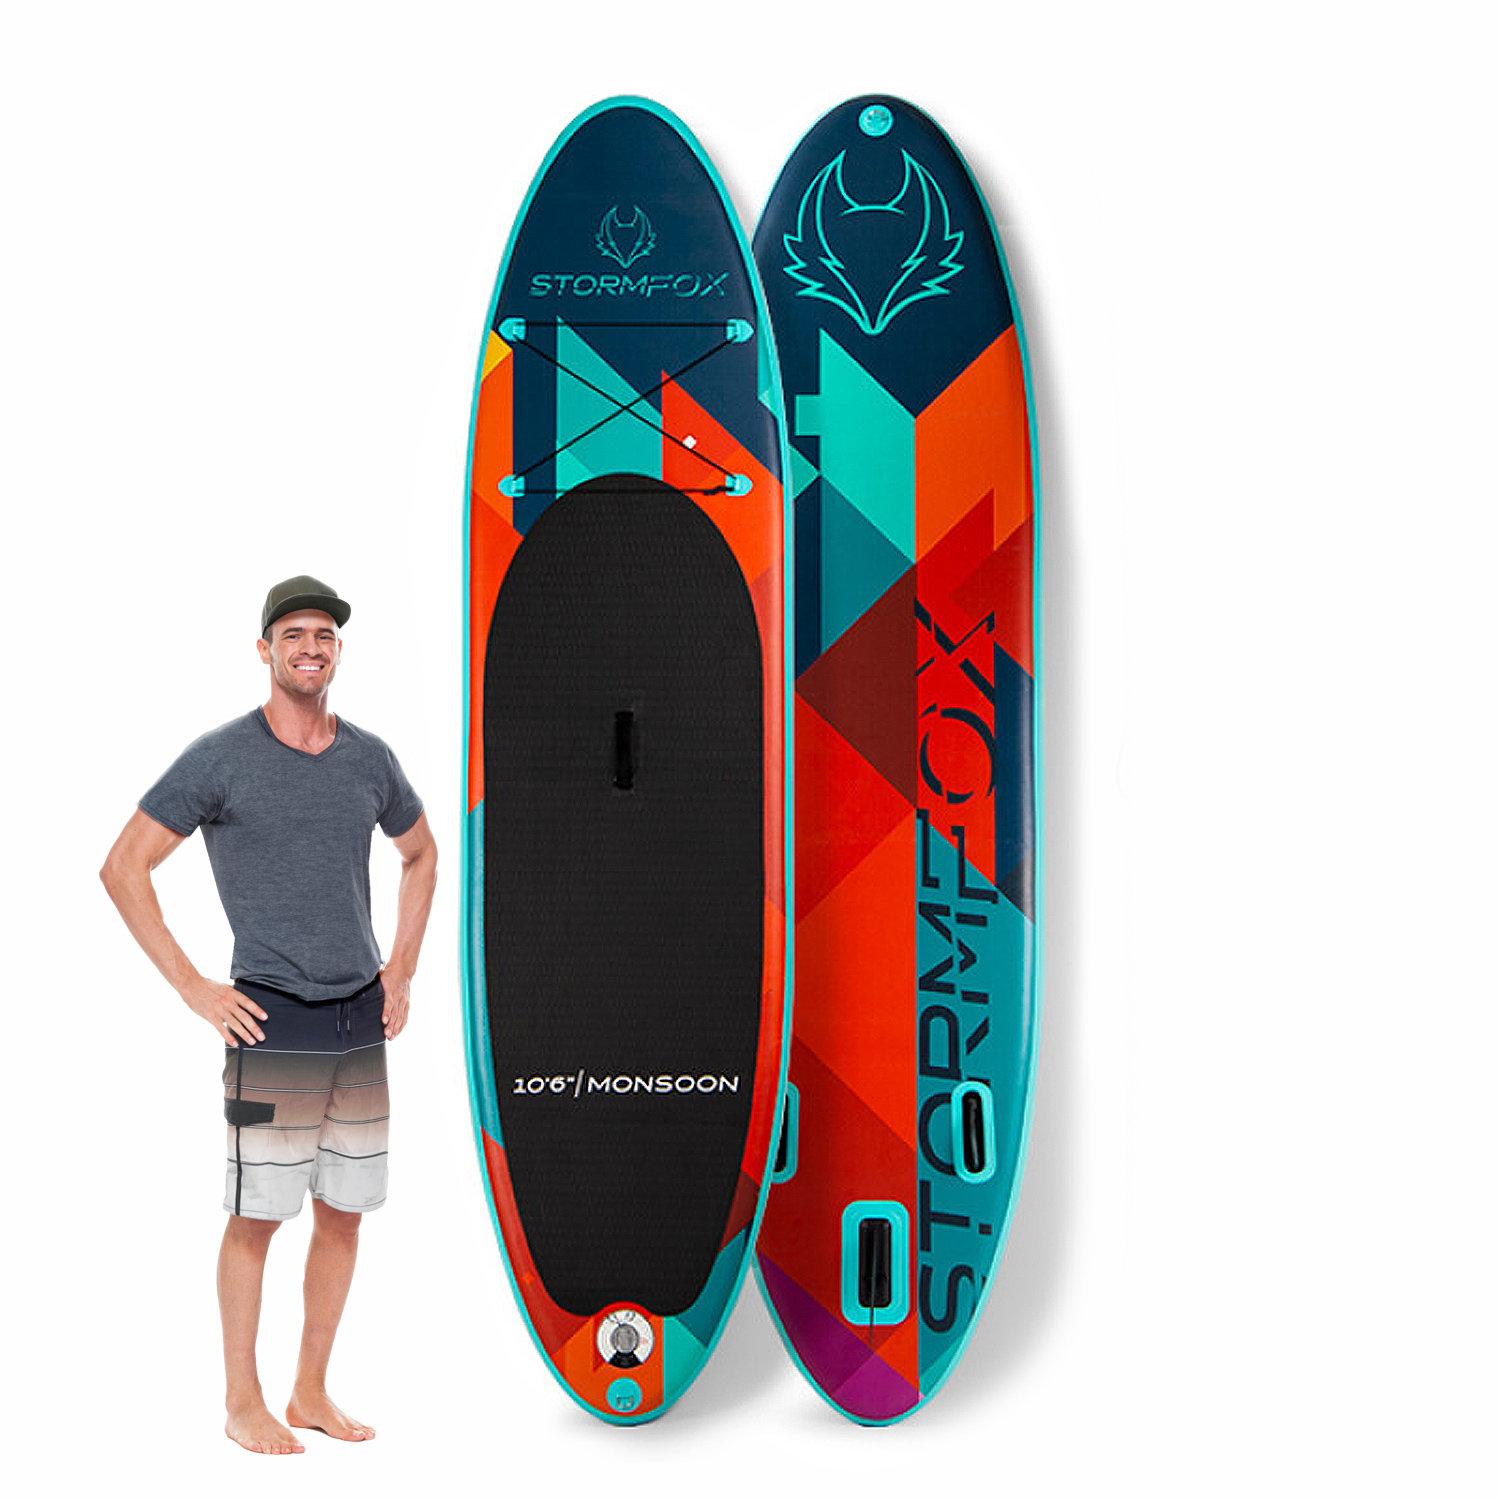 Monsoon Stand Up Paddle Board Kit - 10' 6